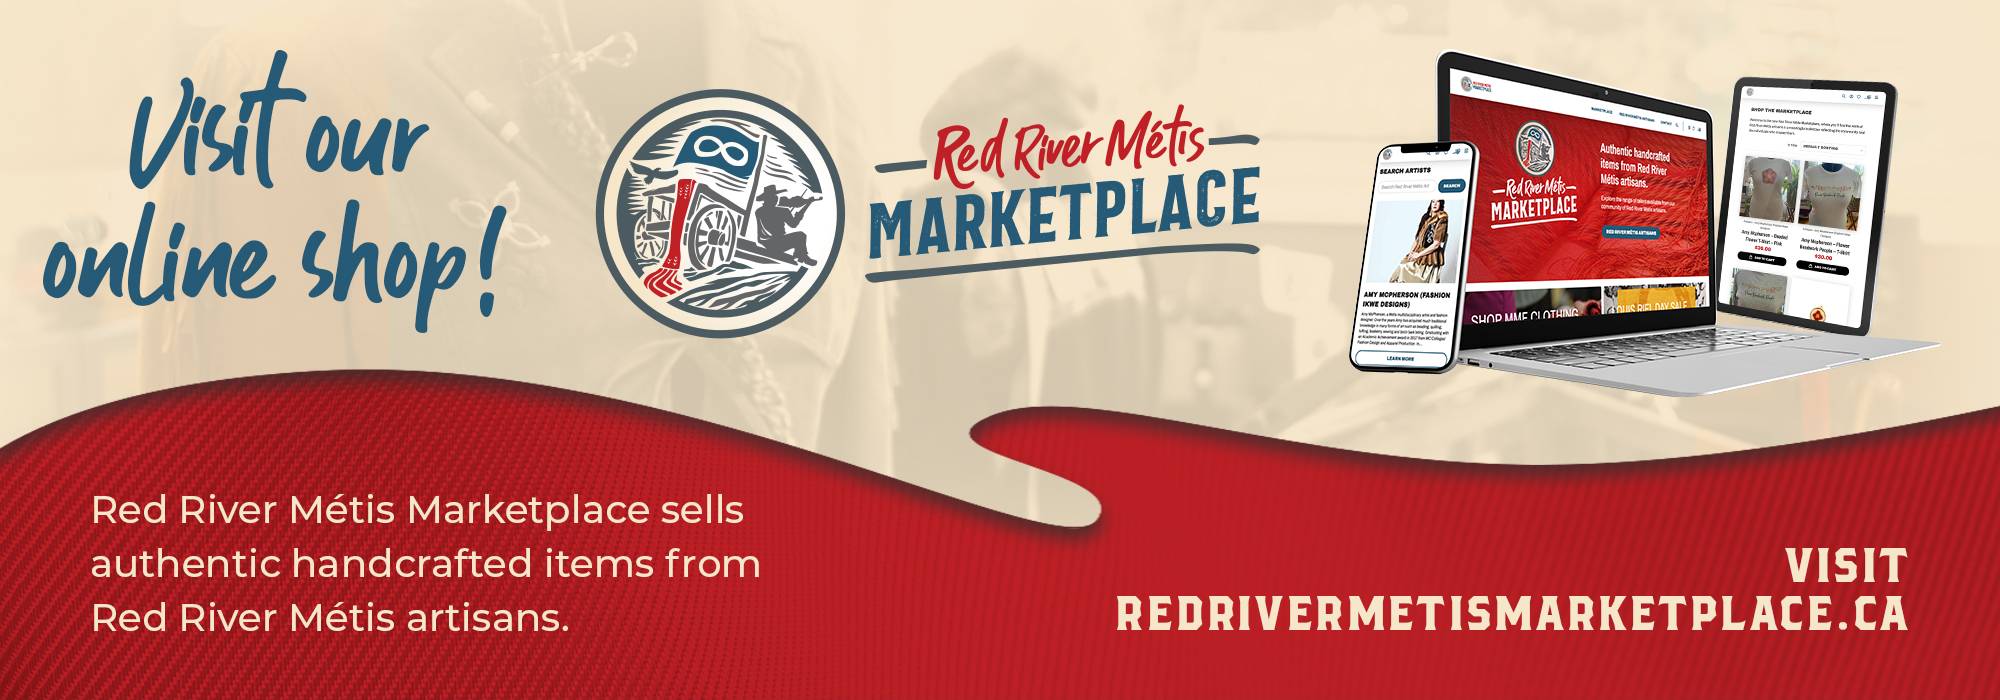 Red River Mtis Marketplace